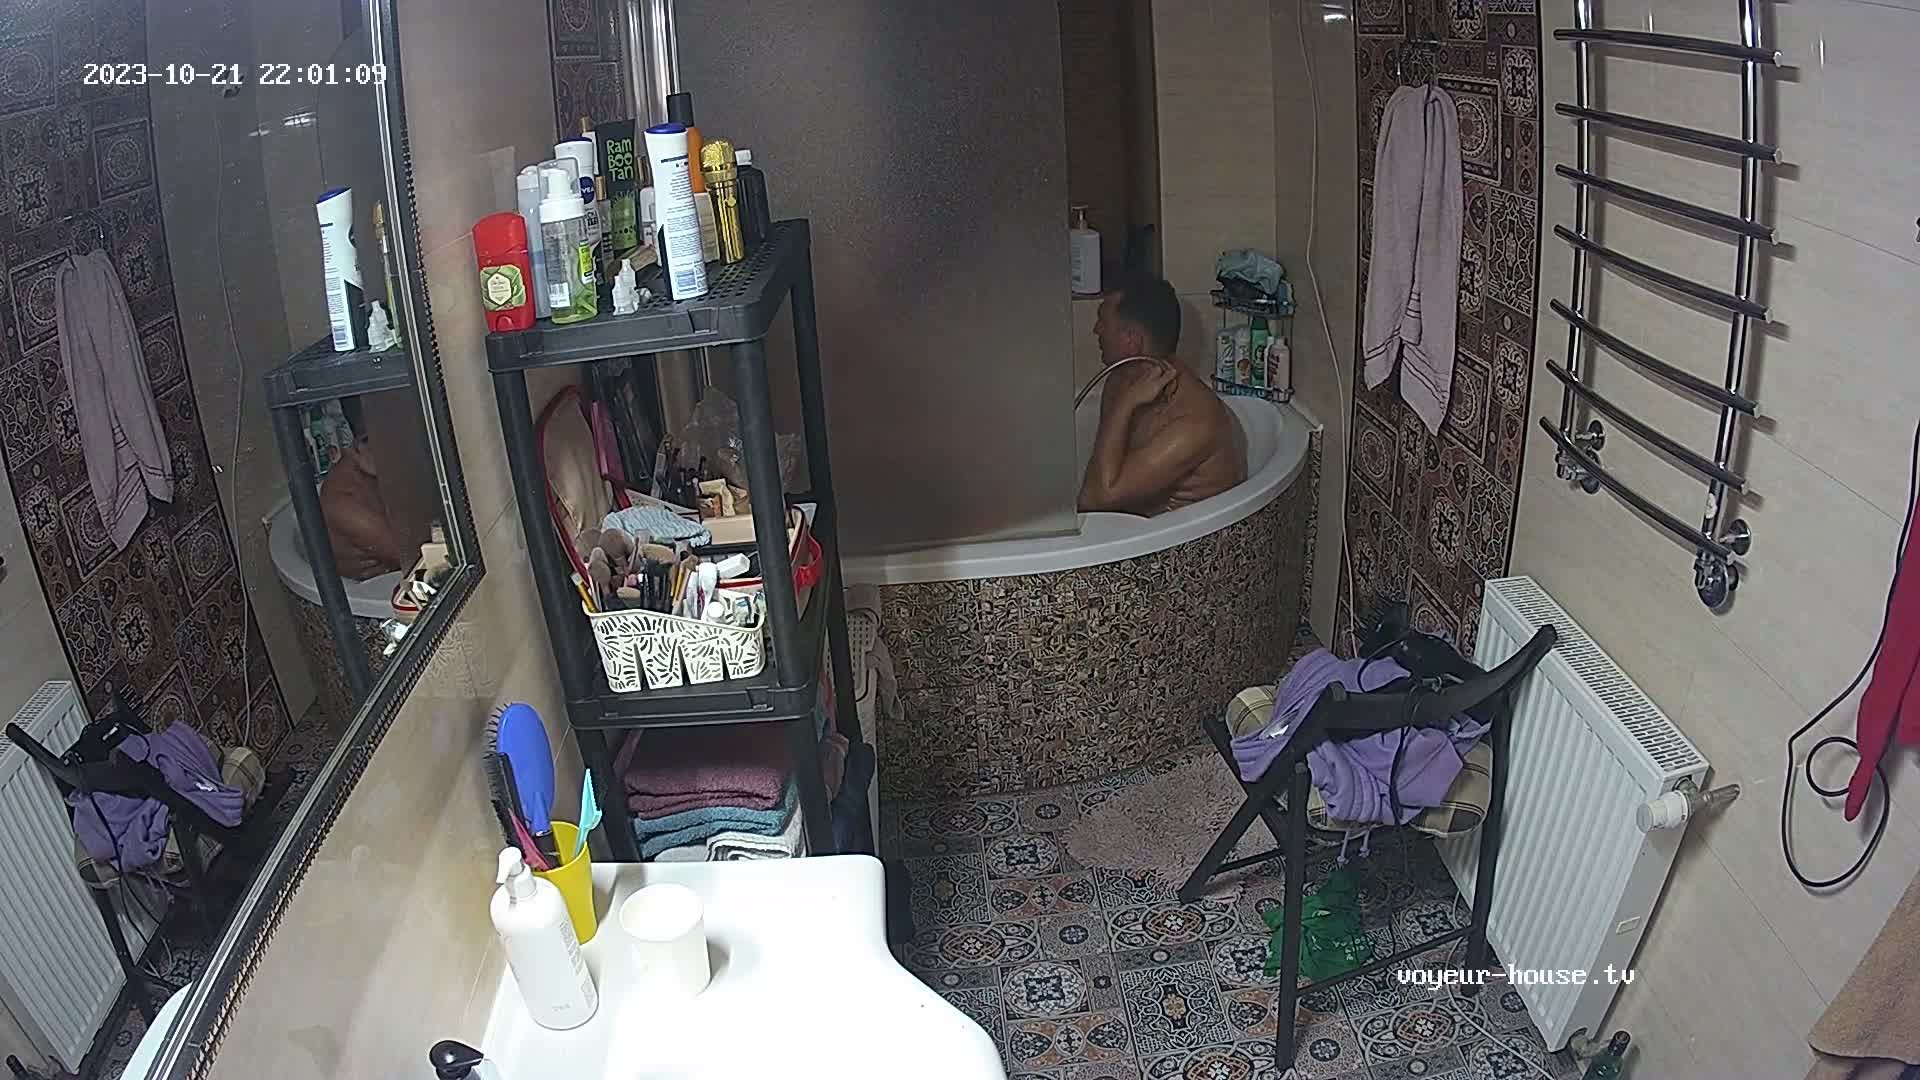 Guests showering after sex, Oct-21-2023